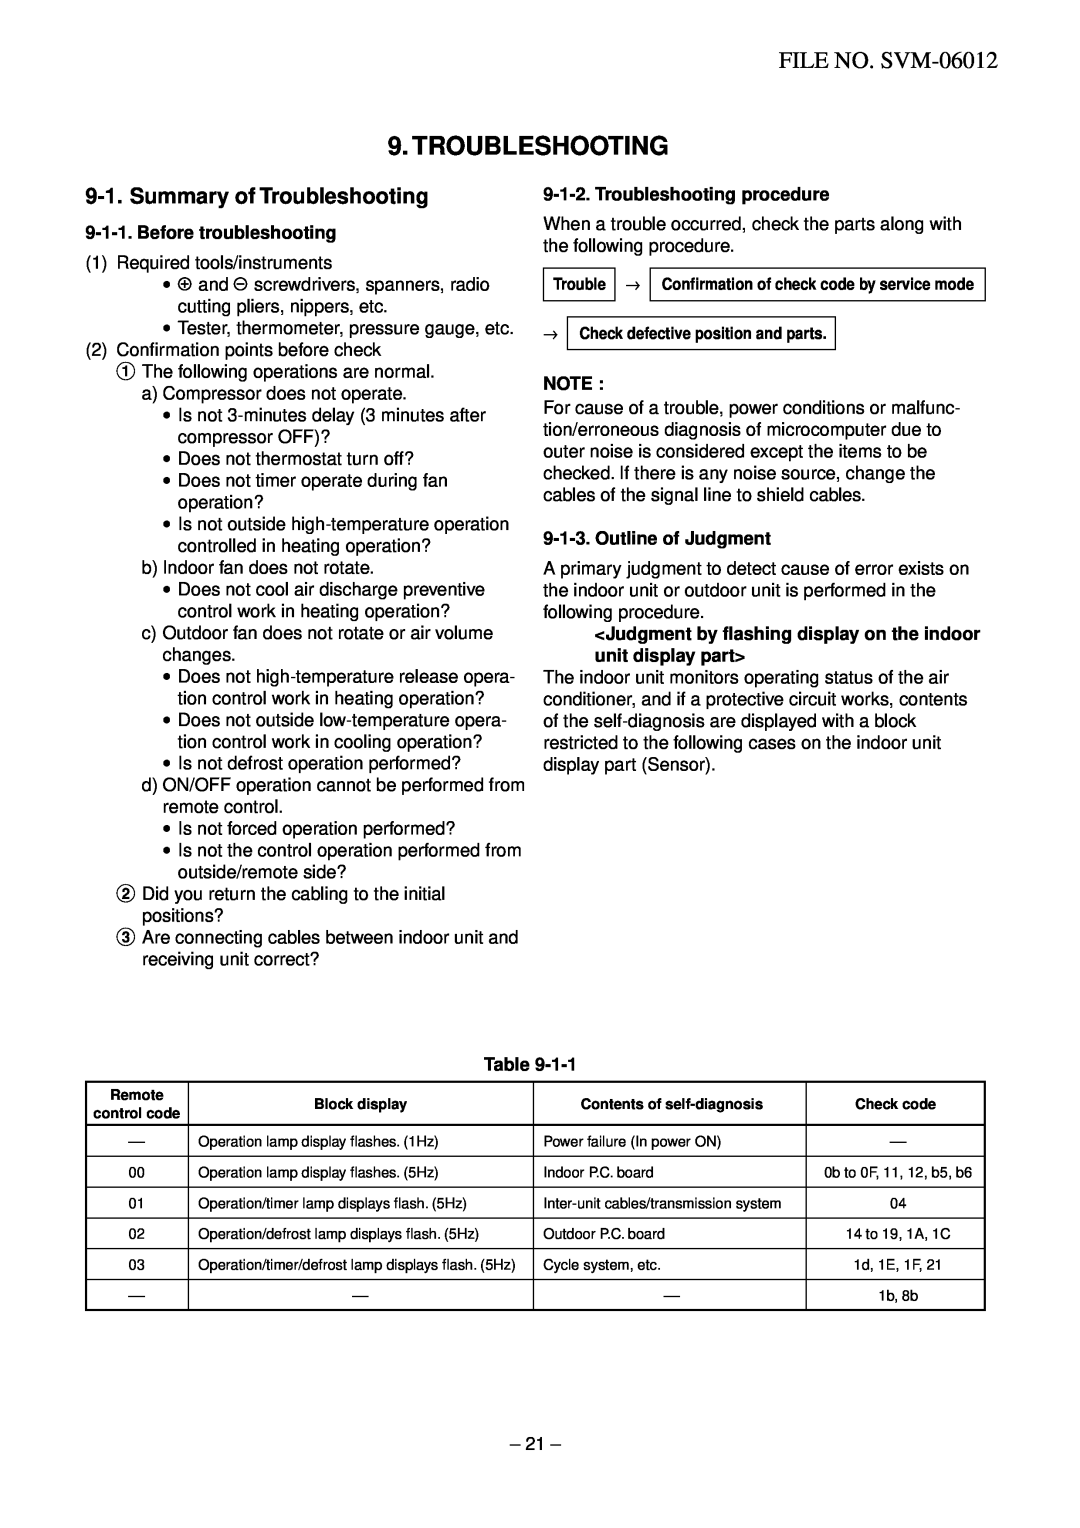 Toshiba RAV-SM562AT-E, RAV-SM802XT-E, RAV-SM802AT-E service manual Summary of Troubleshooting, FILE NO. SVM-06012 